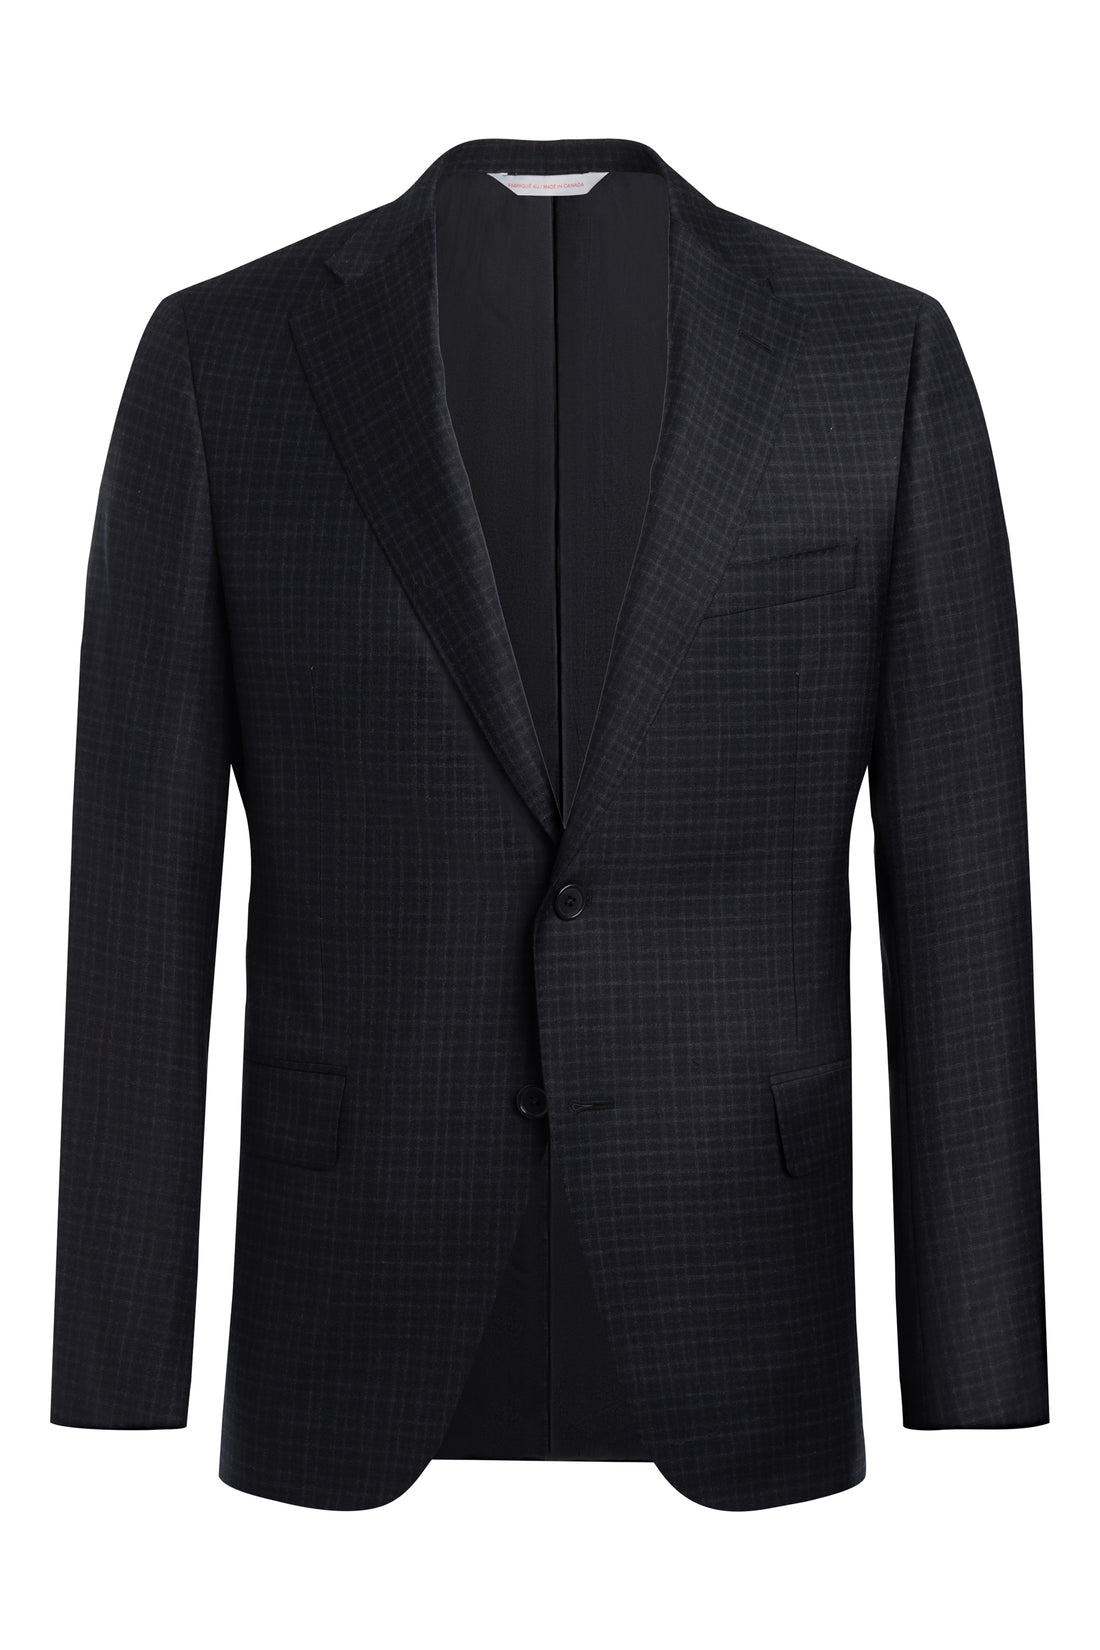 Charcoal and Graphite 110's Check Suit